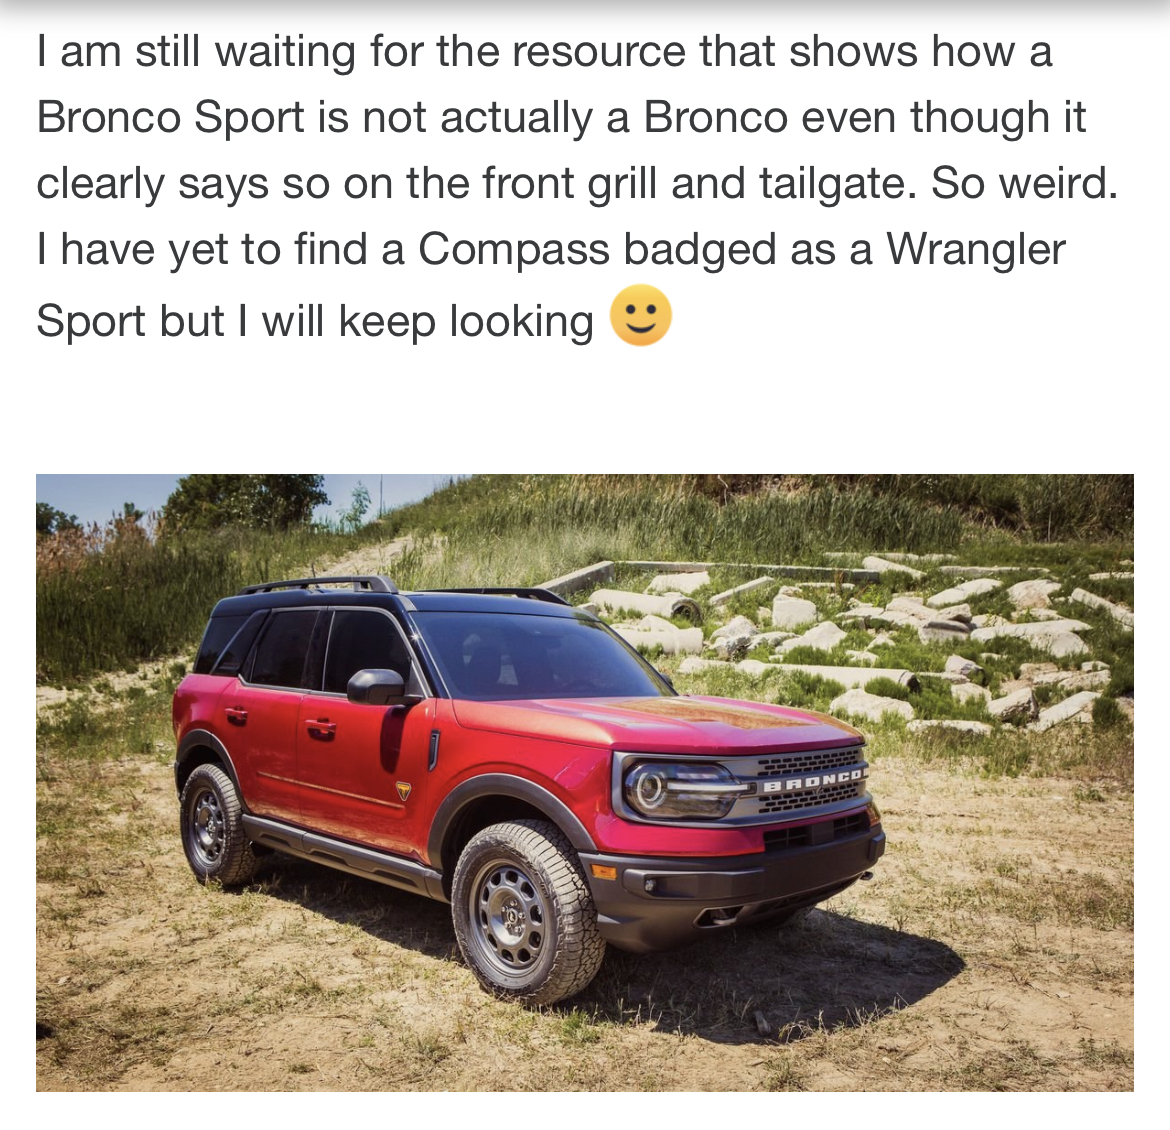 Ford Bronco Bronco engineered to beat Wrangler's VCI (traversing soft terrain) according to member on Wranglerforums 0606A071-5098-4292-8272-27E84FF03879